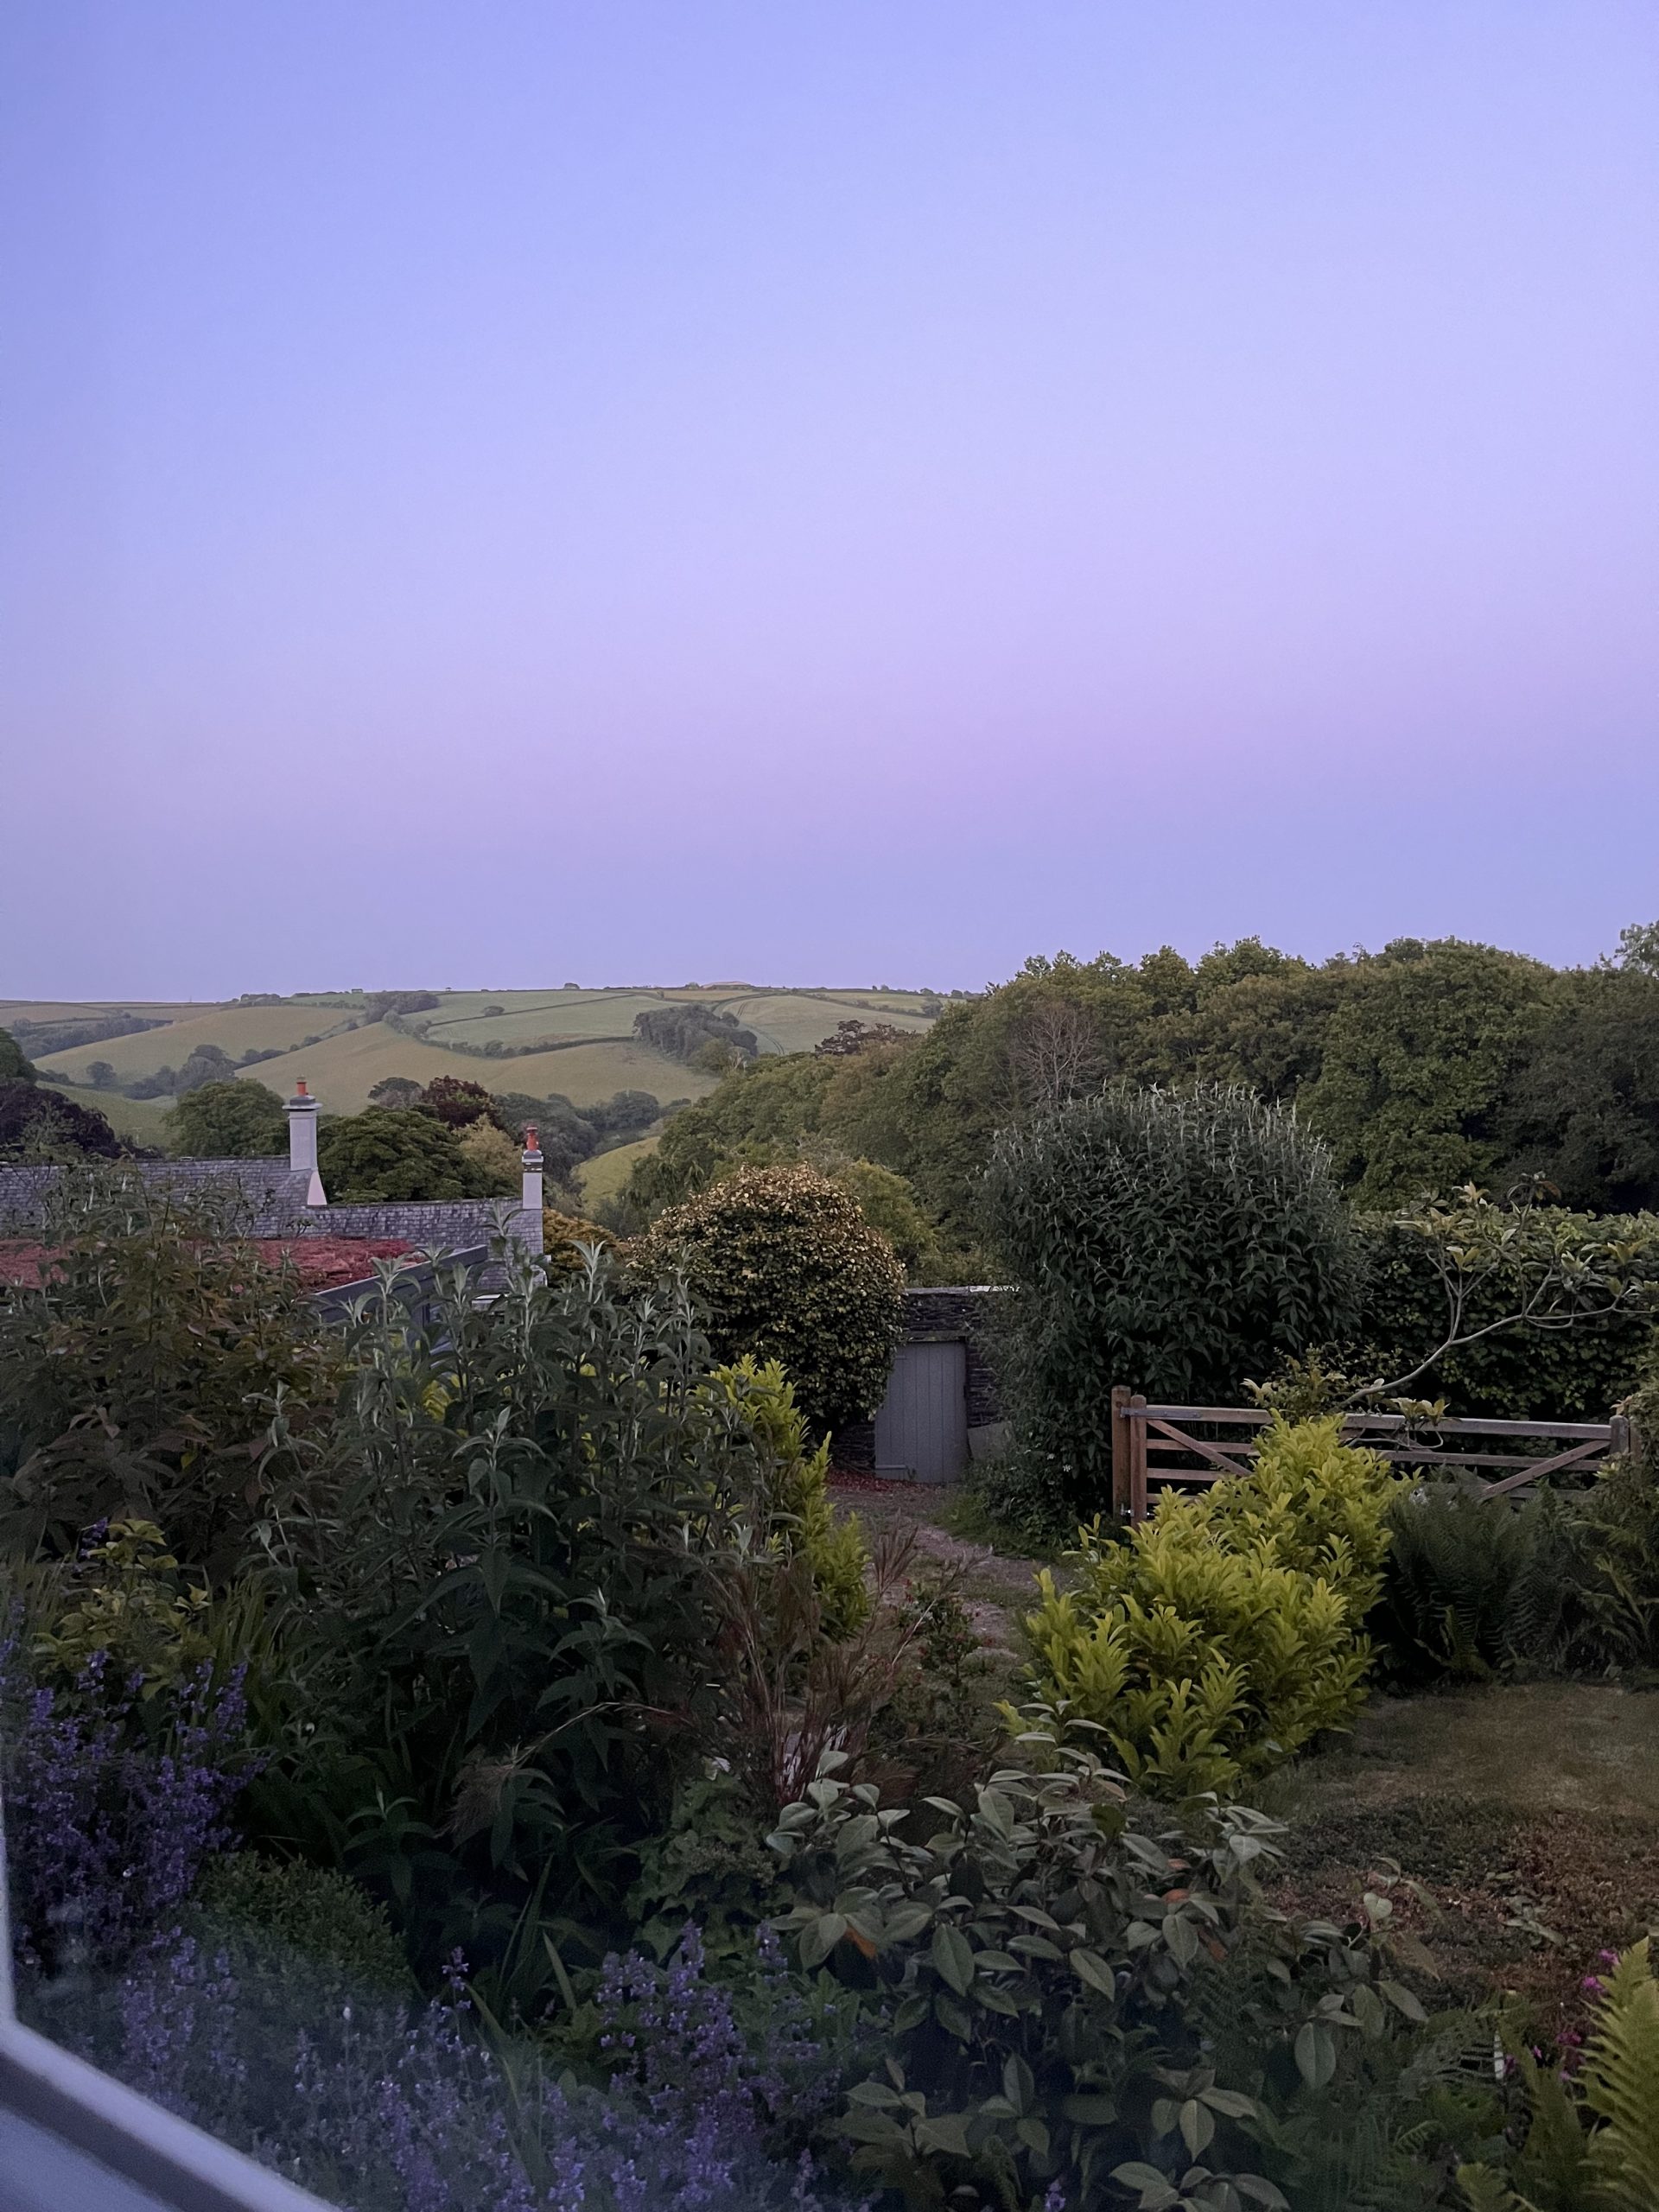 Peaceful sunset at our accommodation in Devon